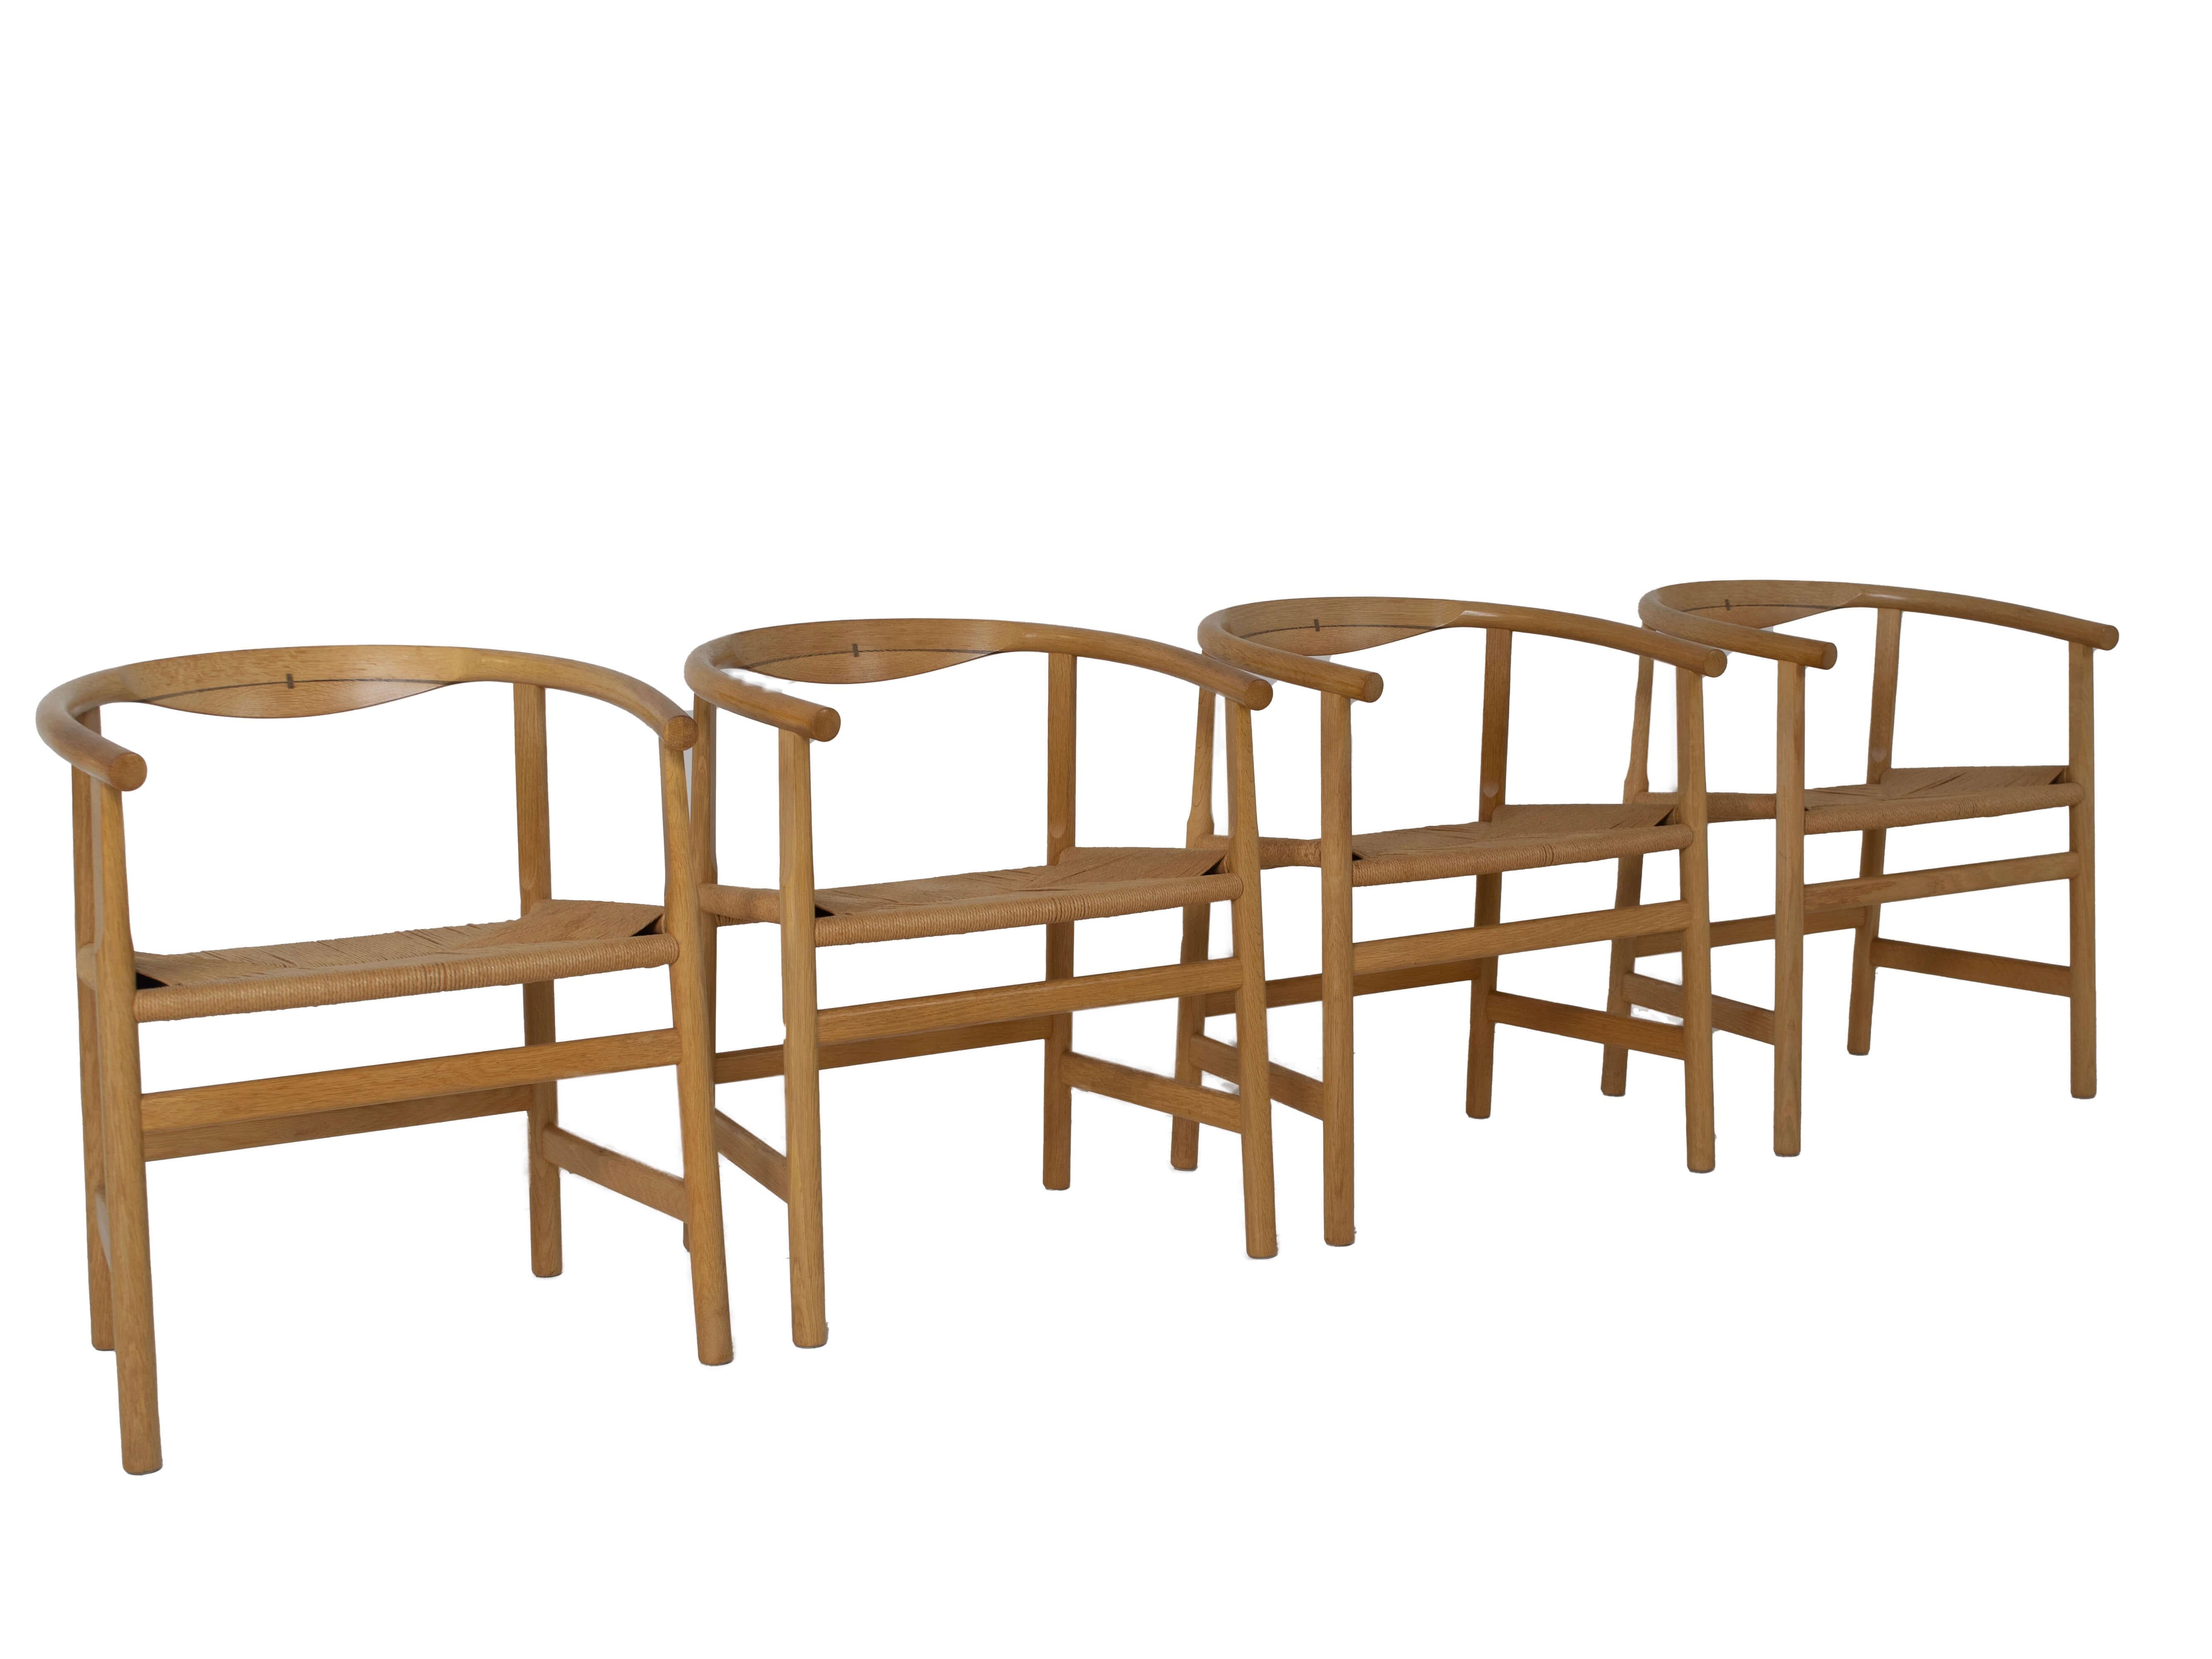 Amazing set of four armchairs designed by Hans Wegner and manufactured by PP Møbler, Denmark. These chairs are made of solid oak with wenge inlay. The seat is made of papercord. The design is timeless and very on-trend, for example in combination